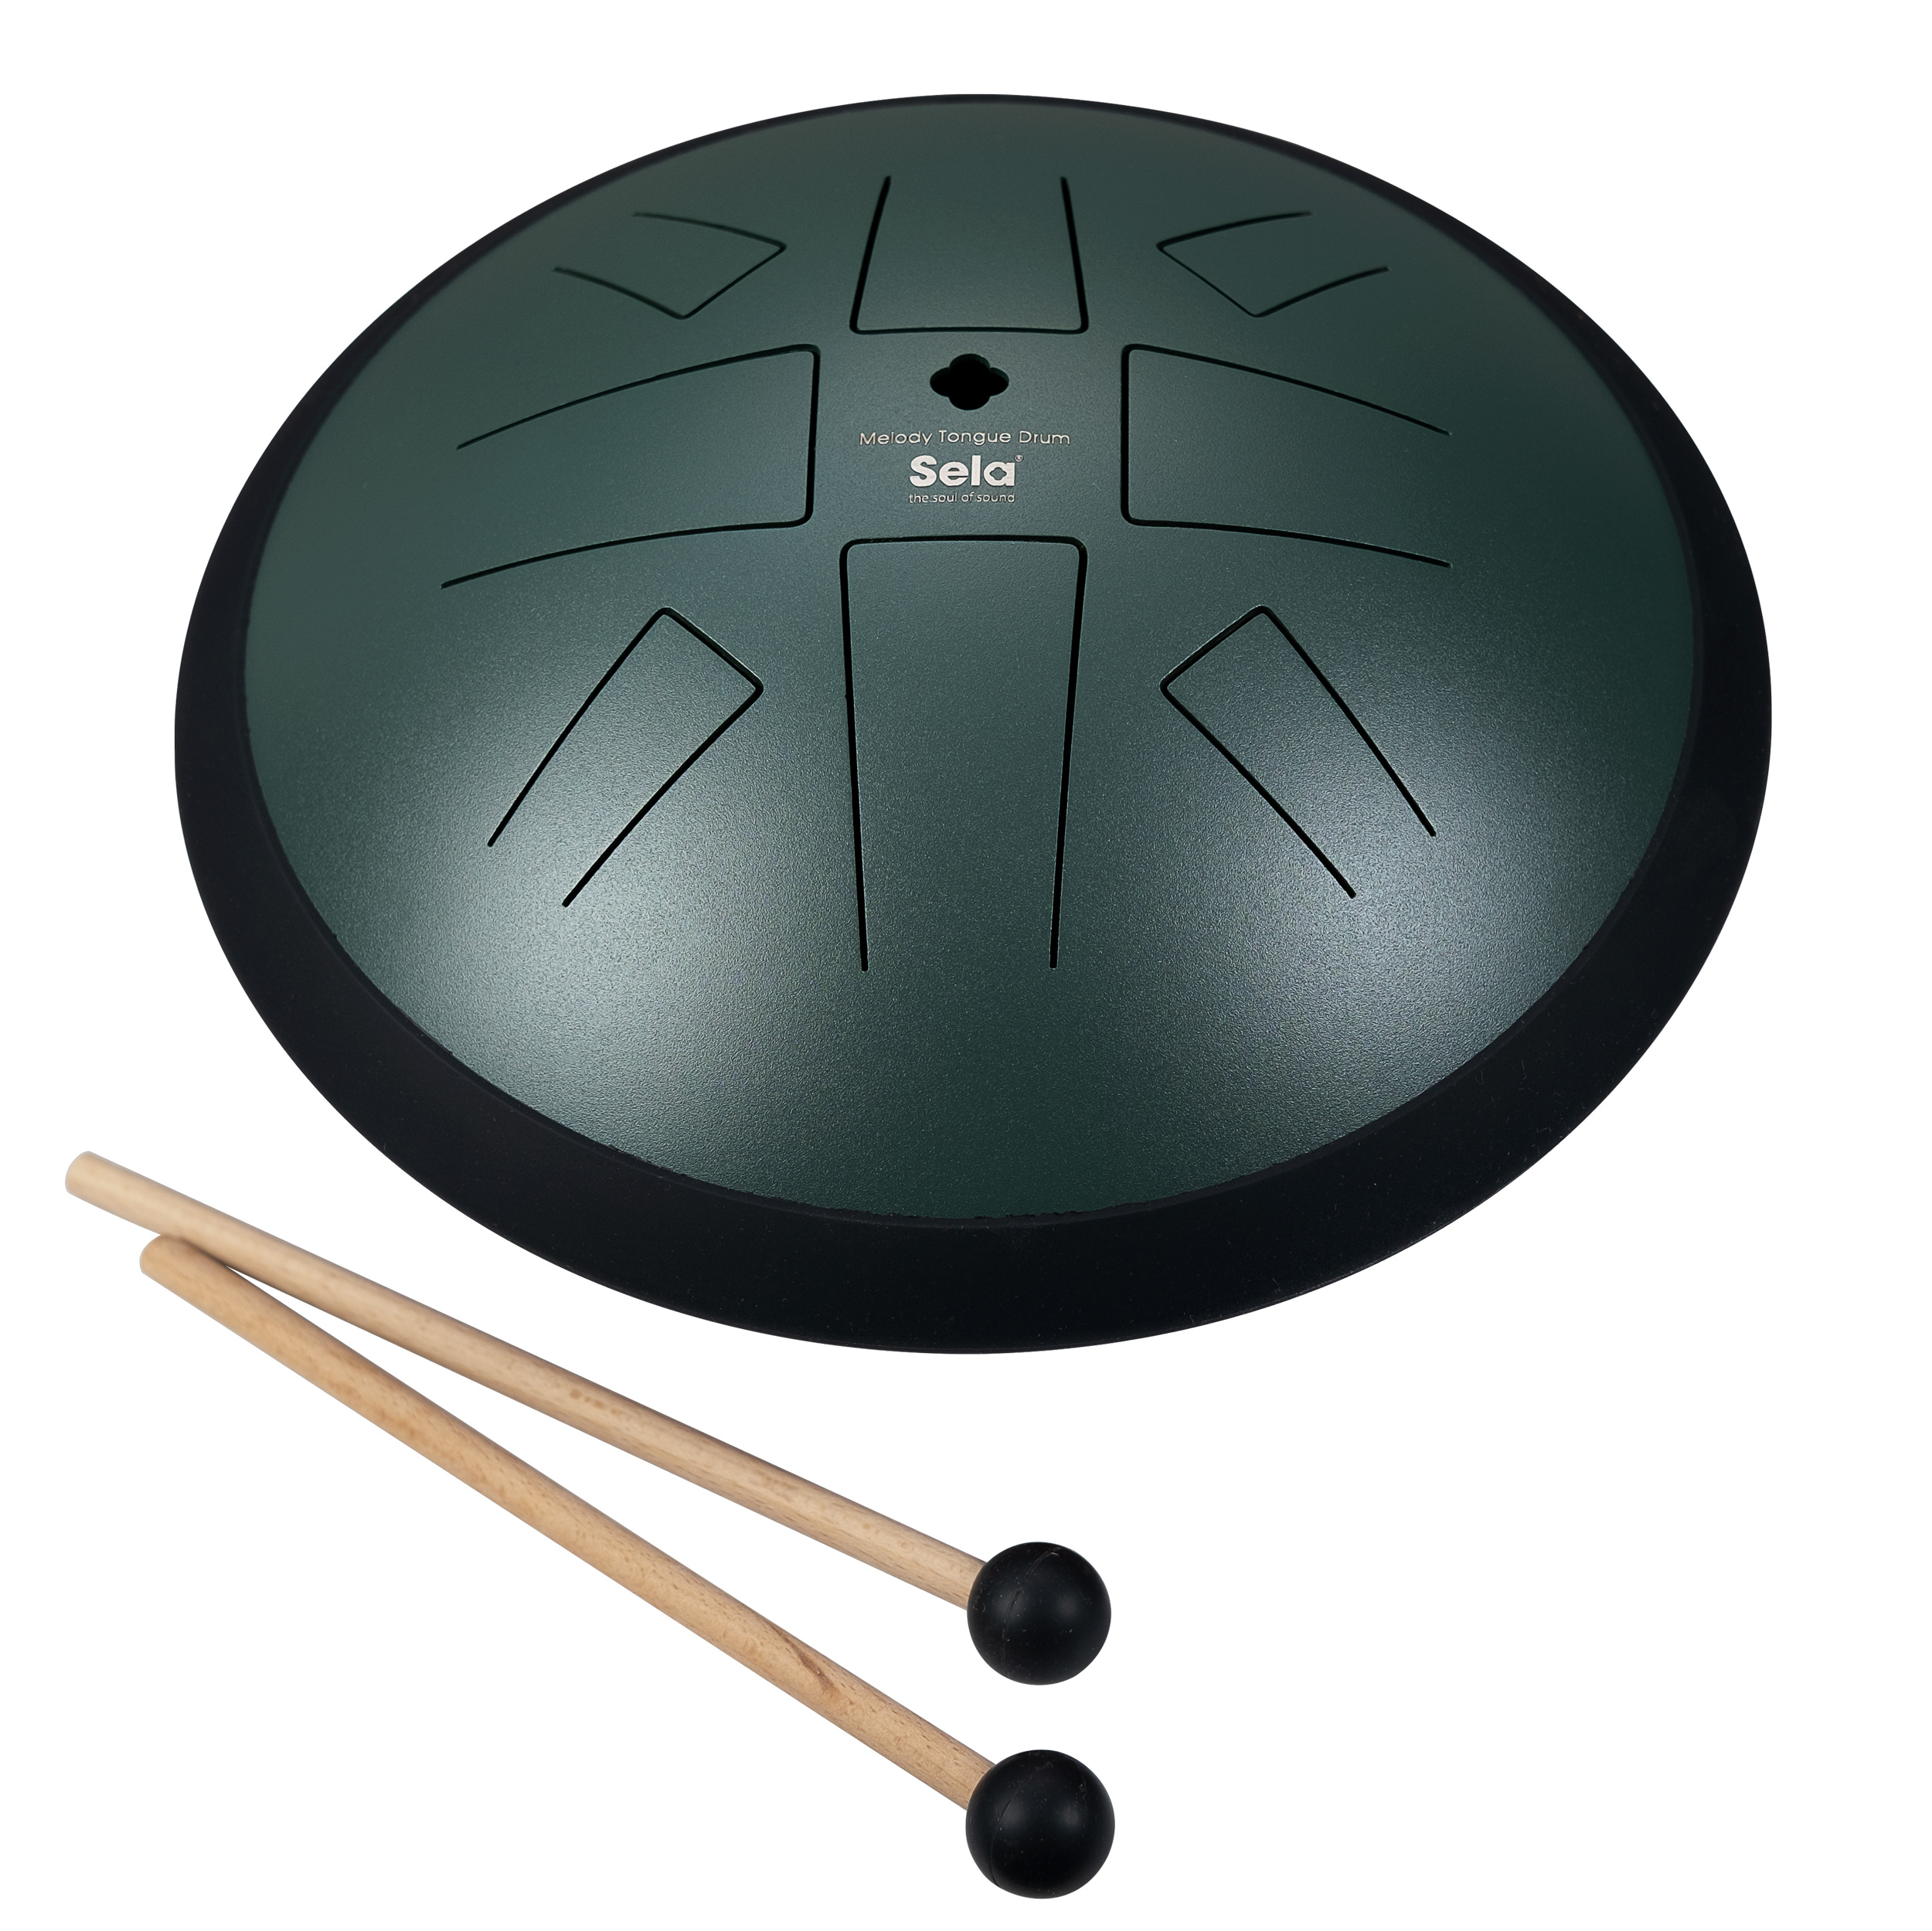 Melody Tongue Drum 10“ C Golden Gate Dark Green Product Photos 1